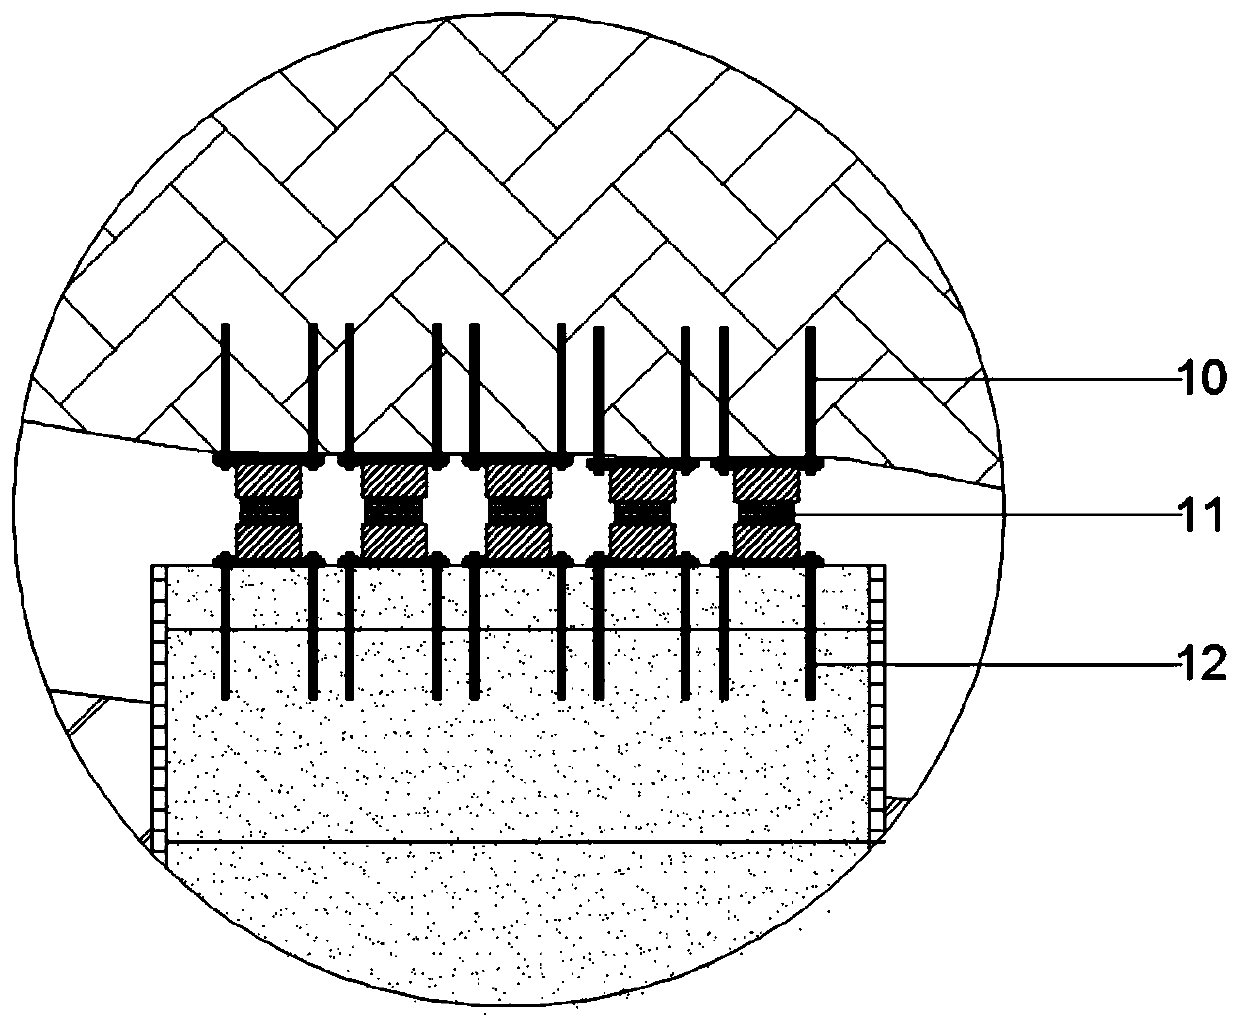 A method for constructing artificial pillars in underground engineering